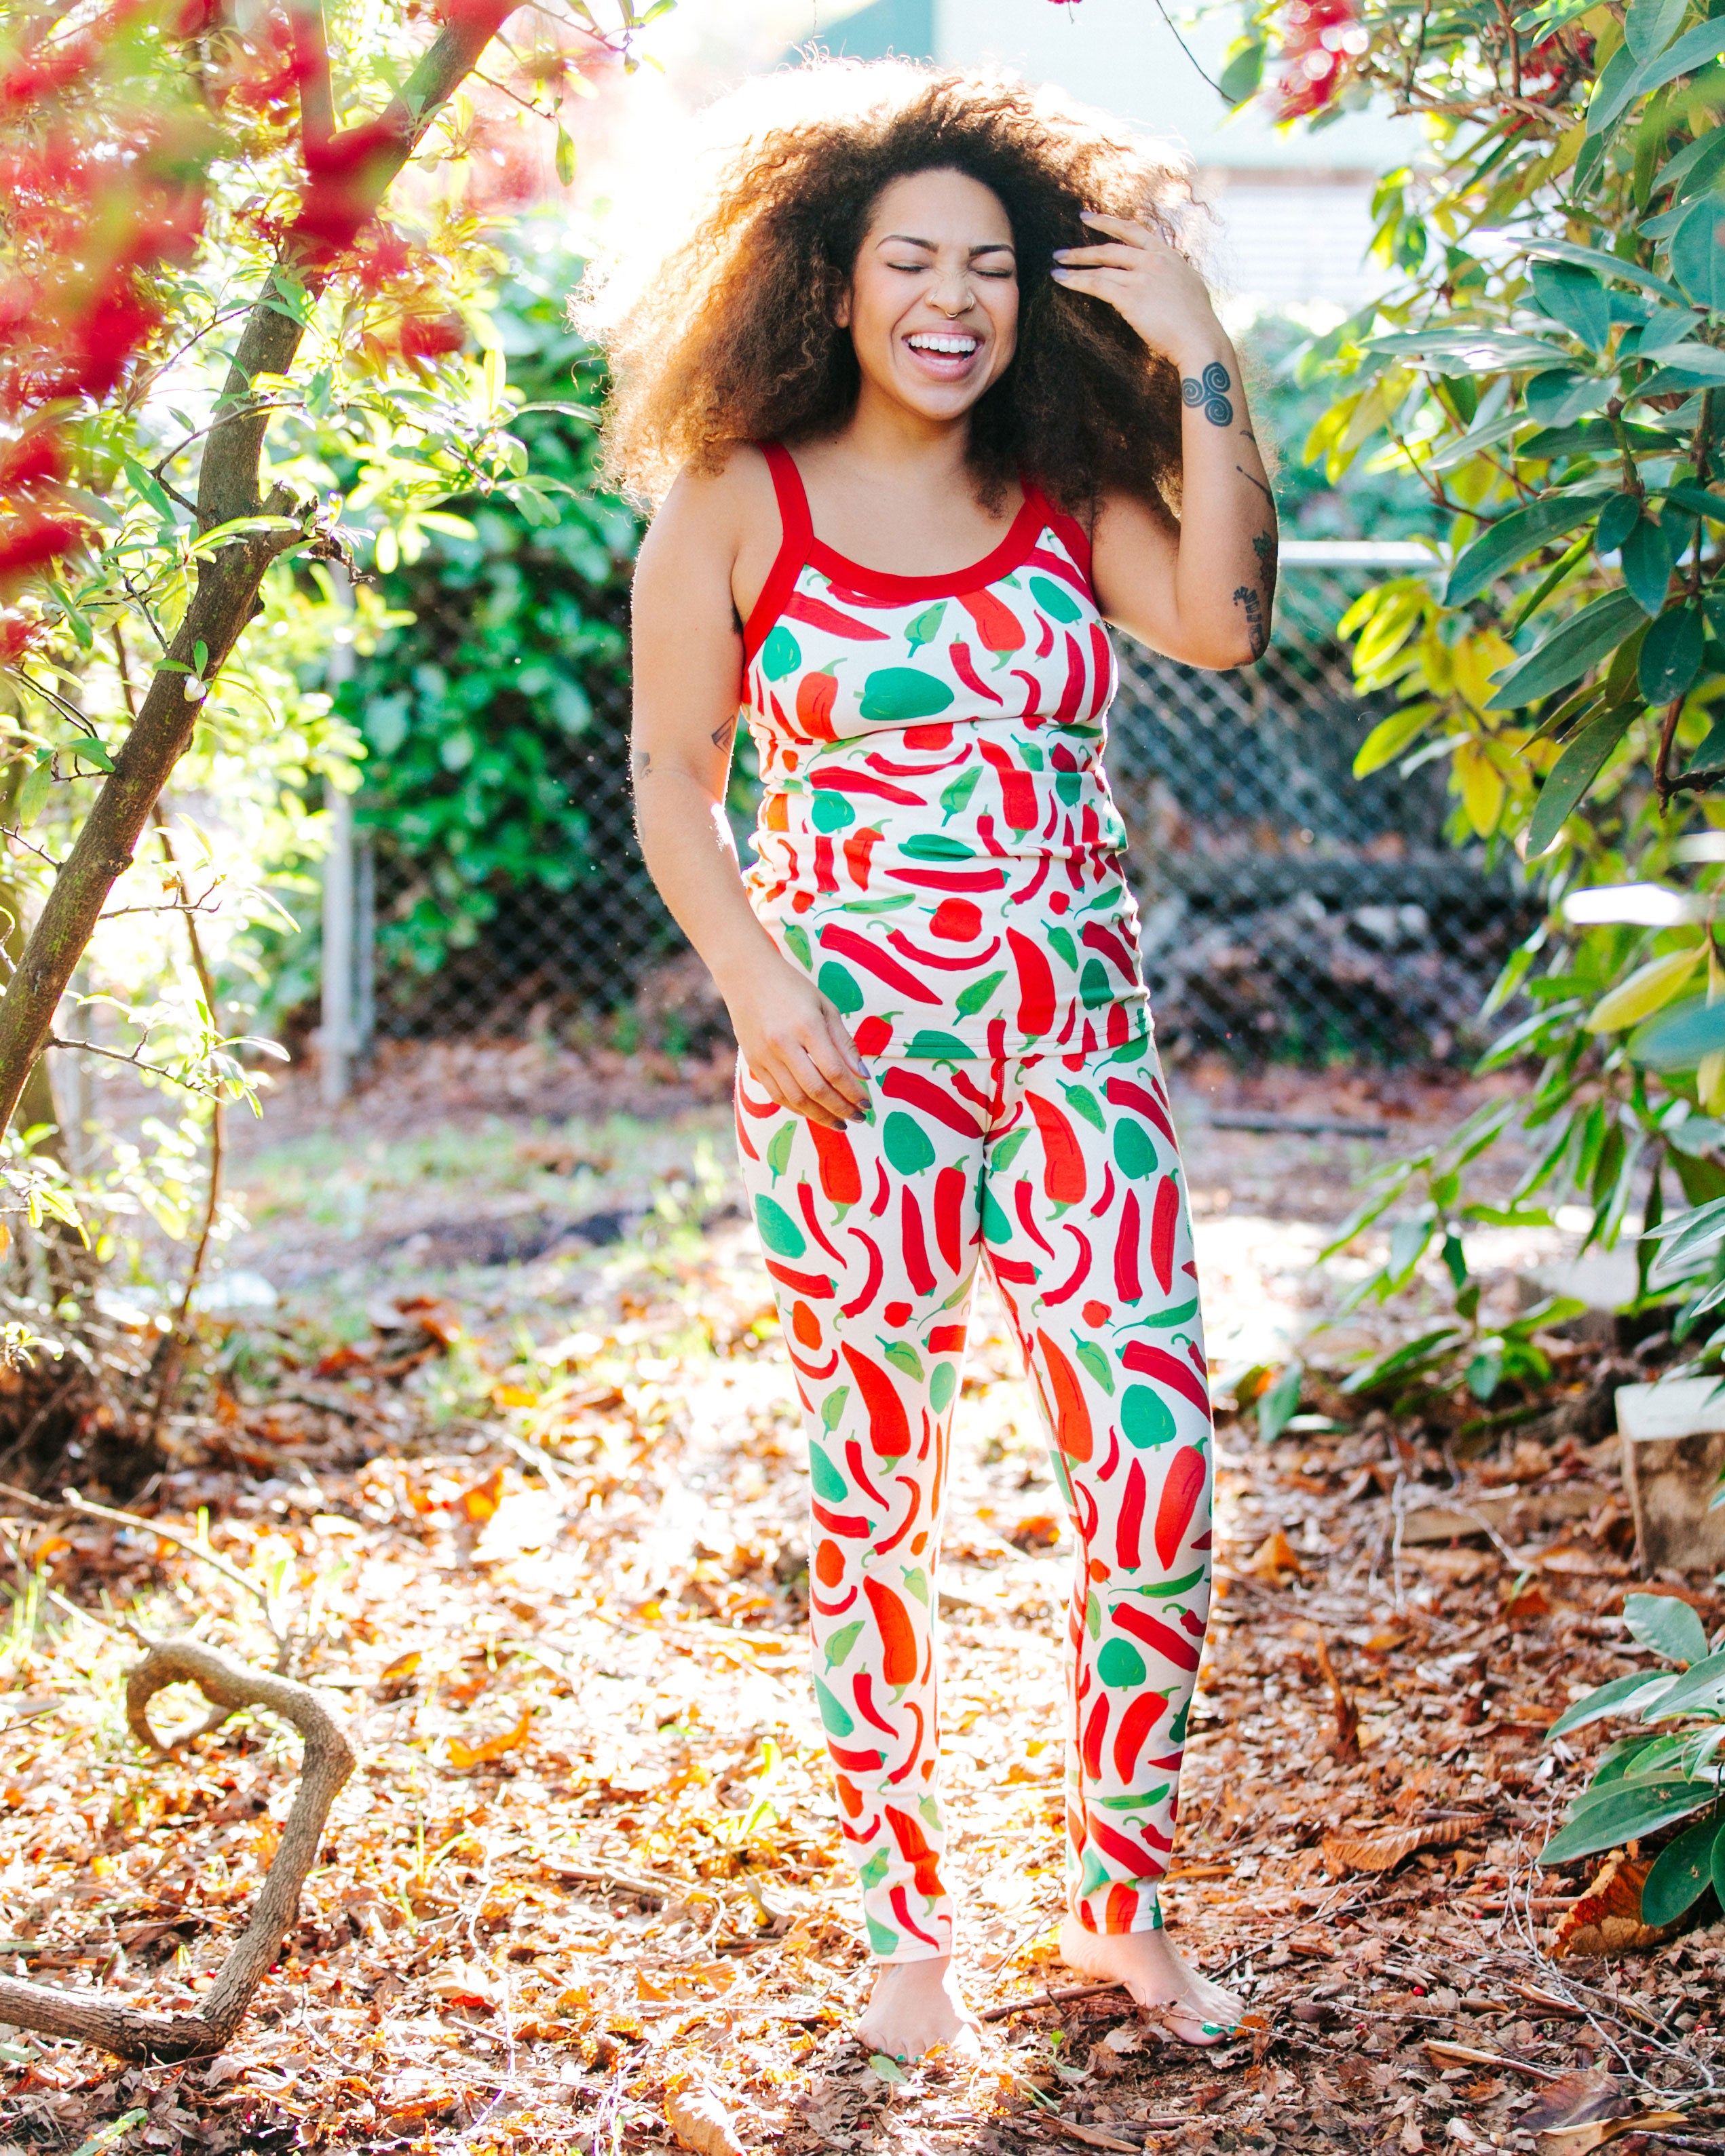 Model laughing outside wearing Thunderpants organic cotton Camisole and Leggings in our Hot Pants print: various green, orange, and red peppers printed on Vanilla with red binding.